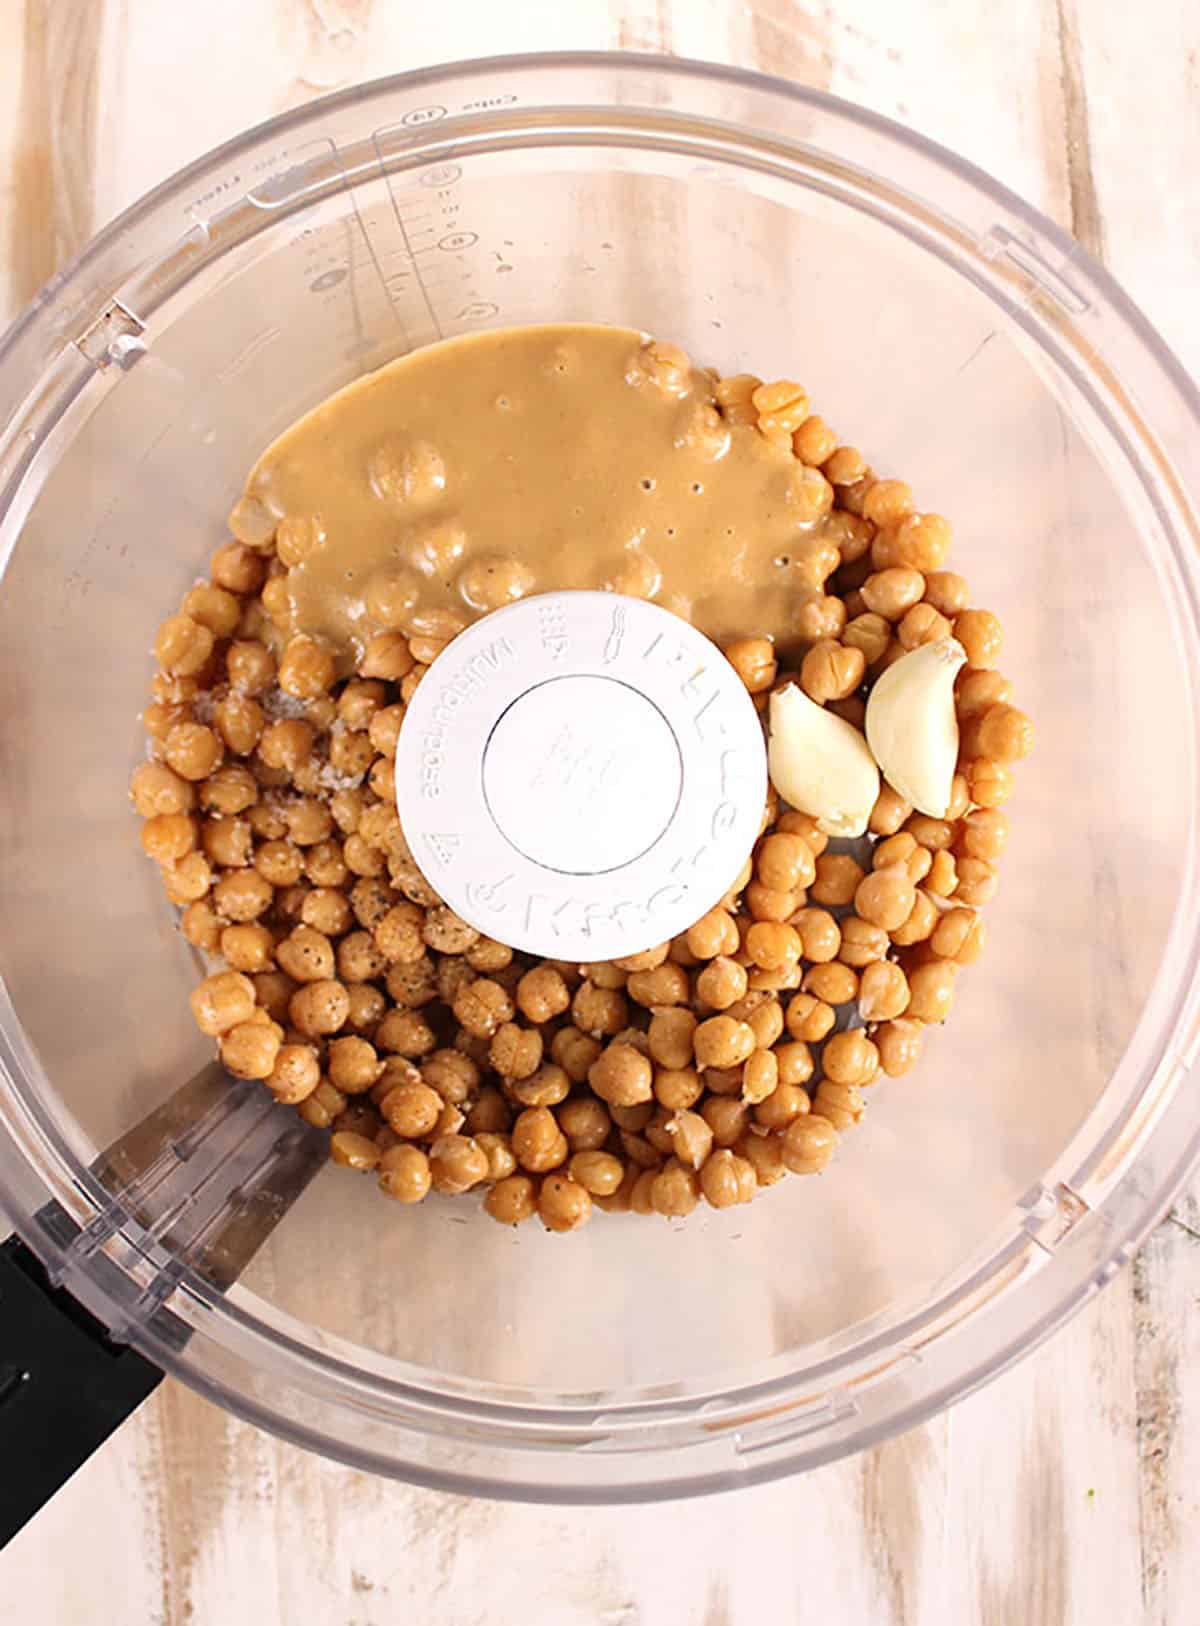 Ingredients for homemade hummus in a food processor